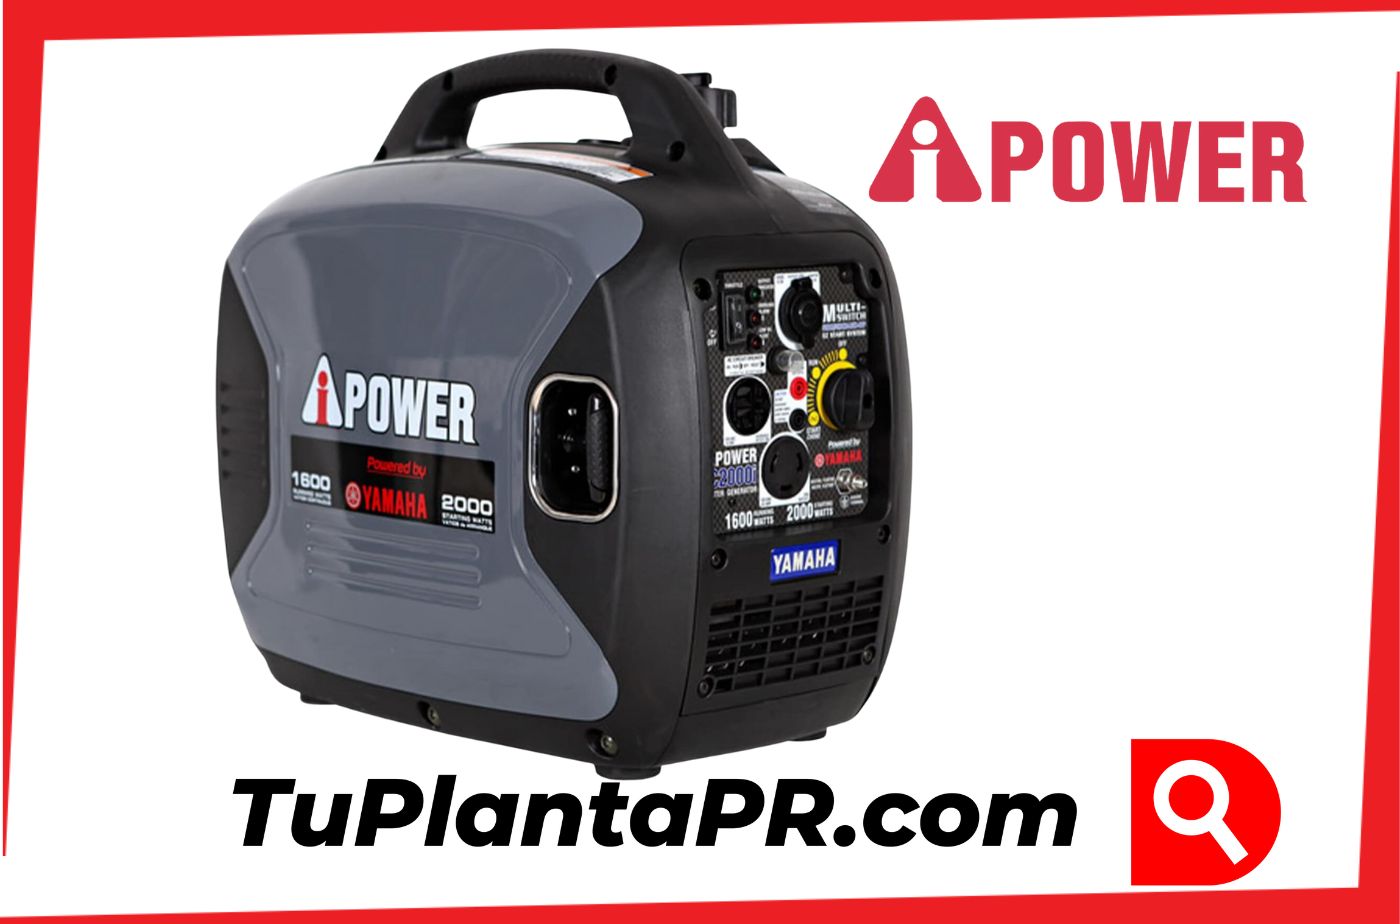 A-iPower Inverters